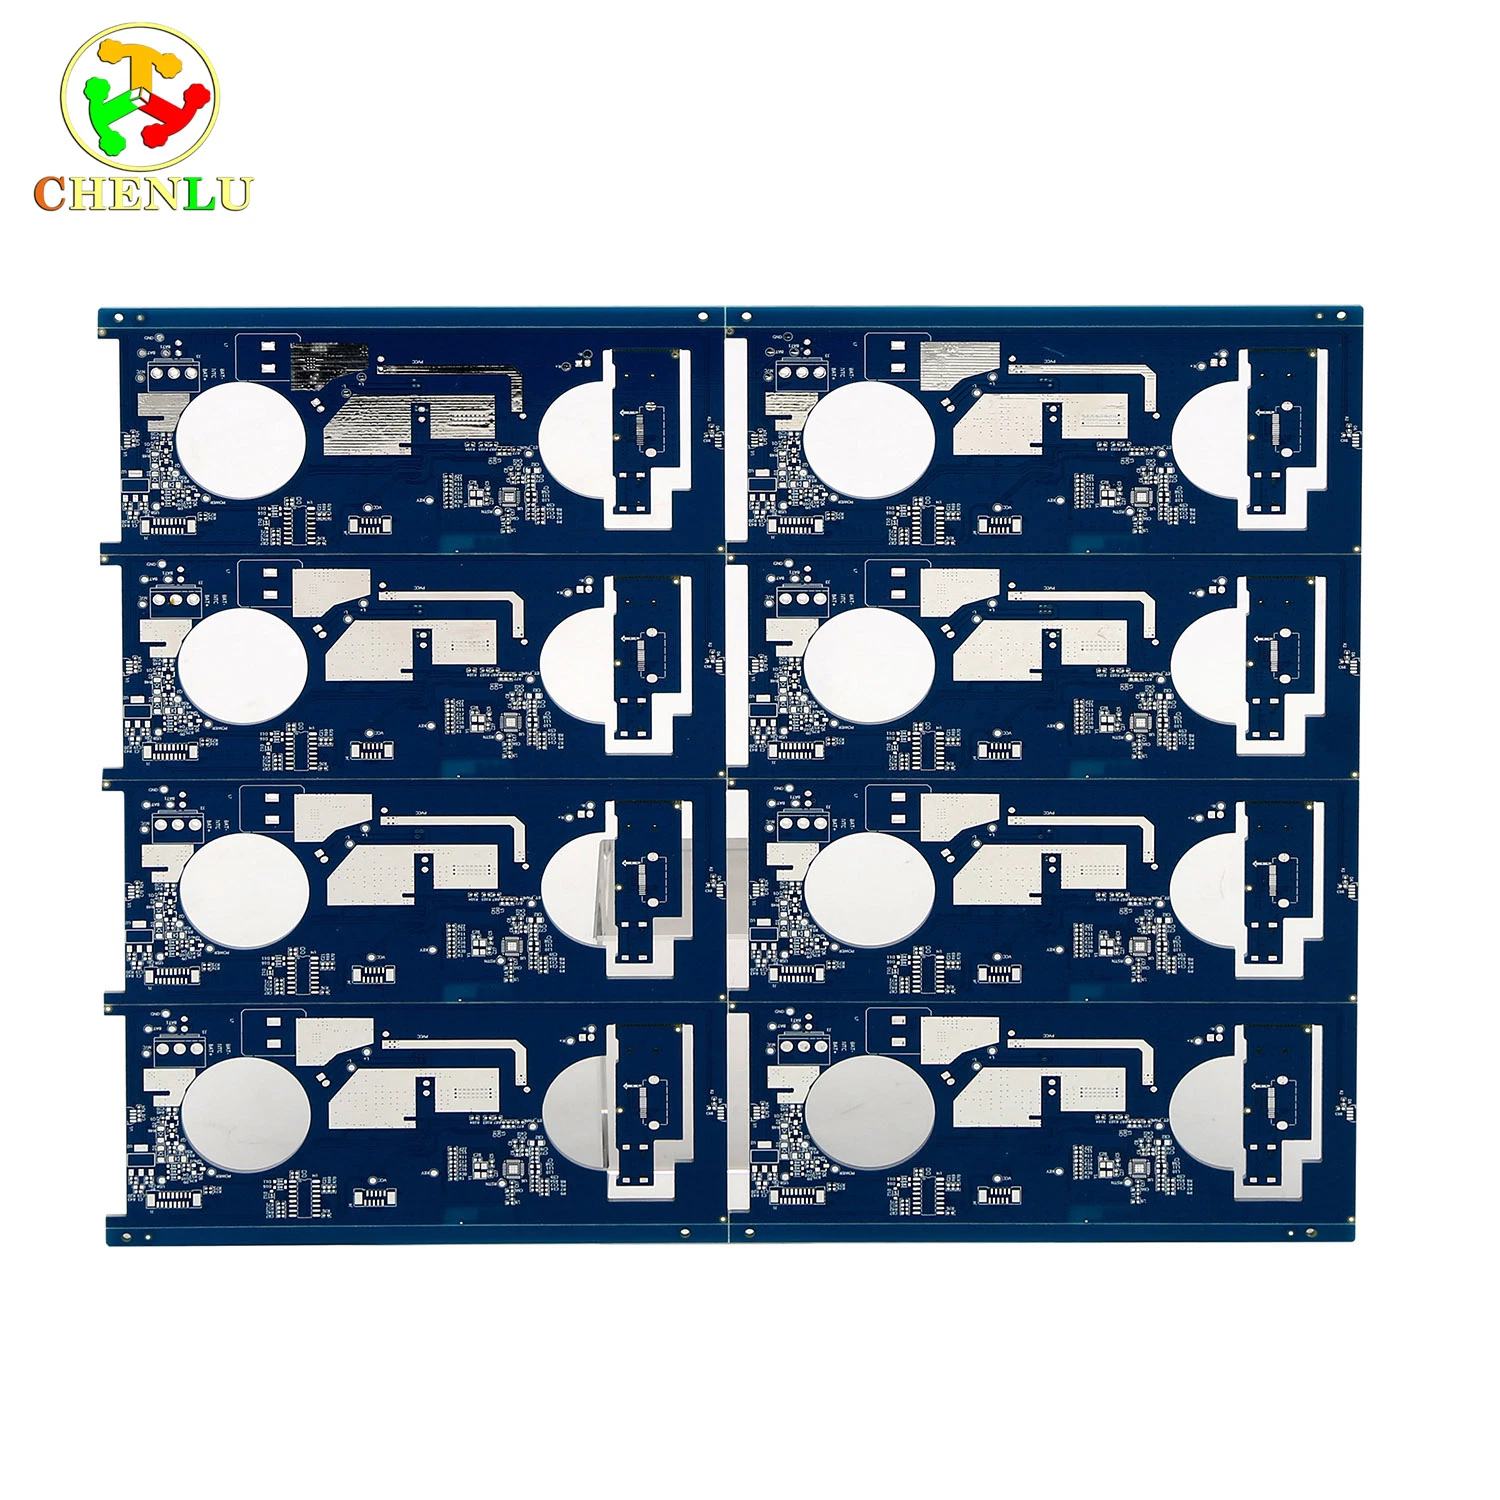 Customized PCB Design and Manufacturing Service by Leading Experts